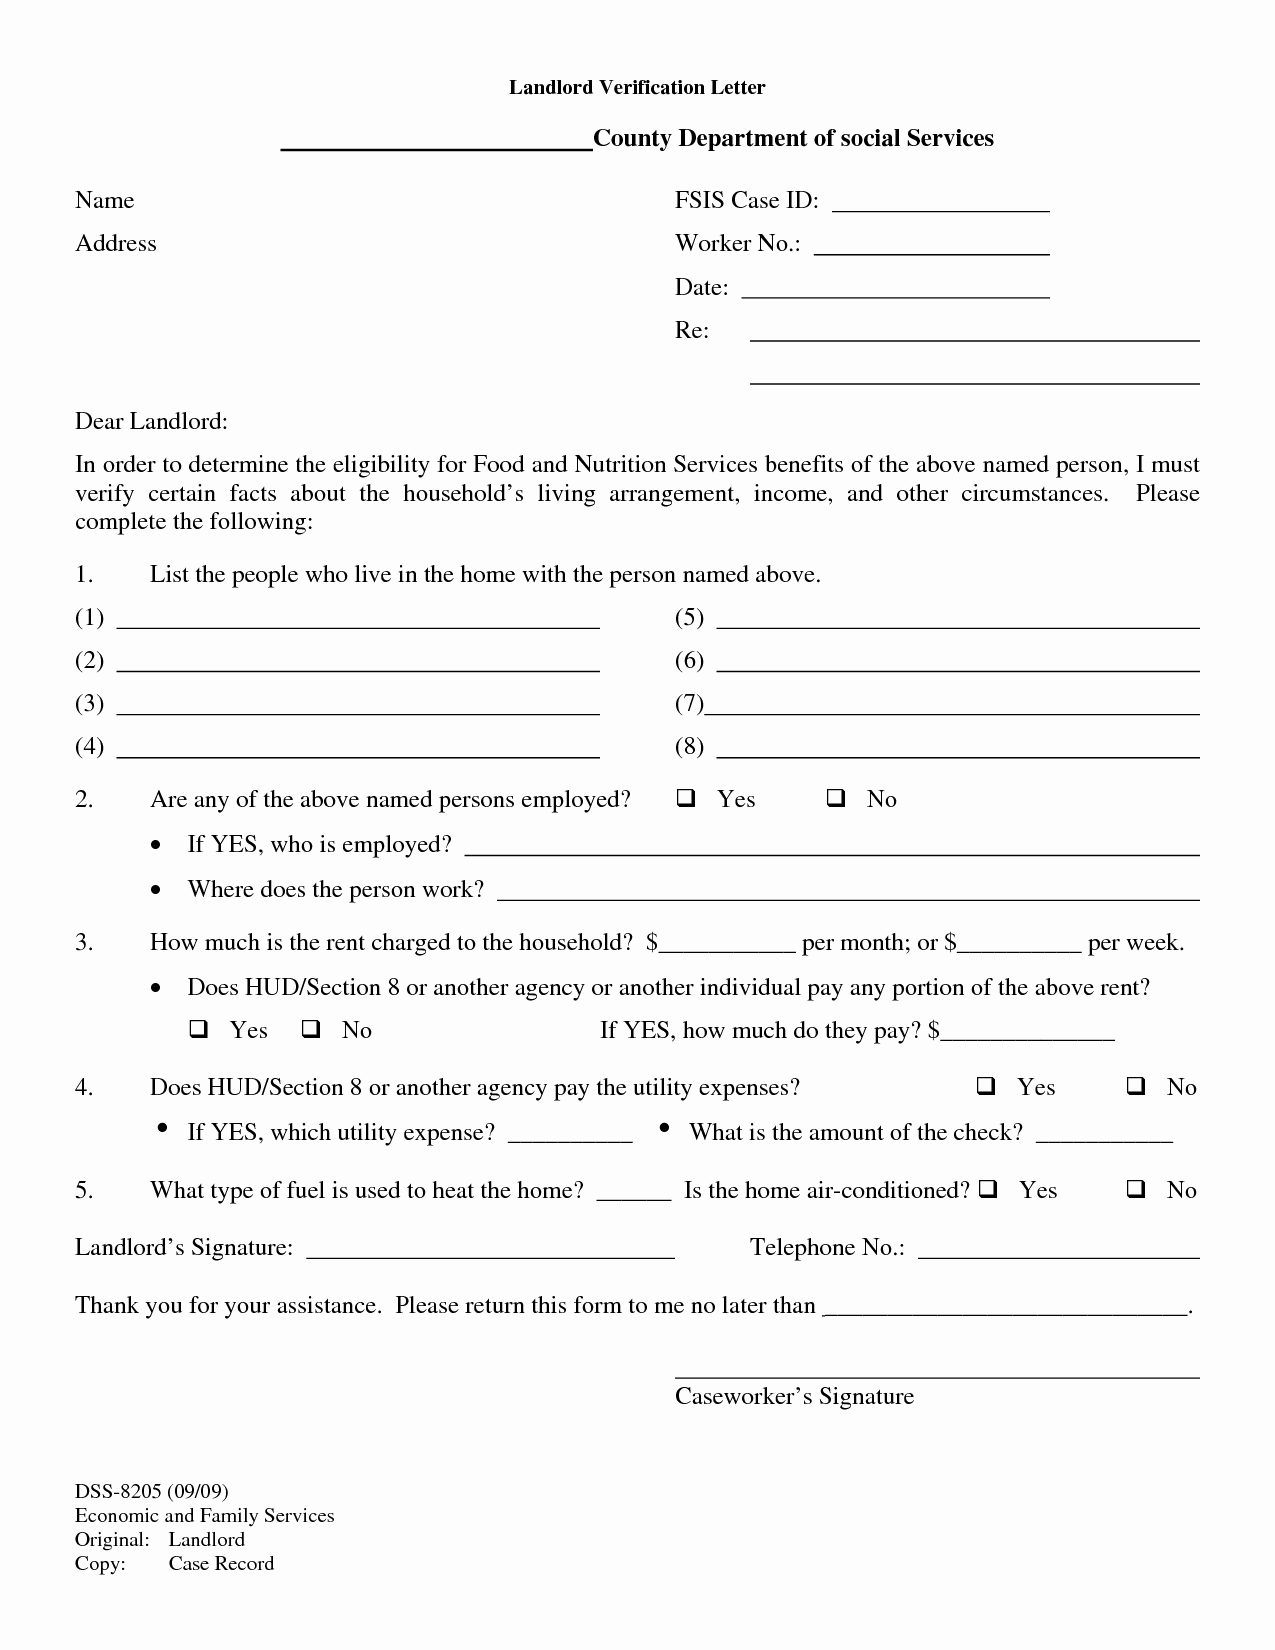 Landlord Verification form Template New Proof Residency Letter From Landlord Free Download